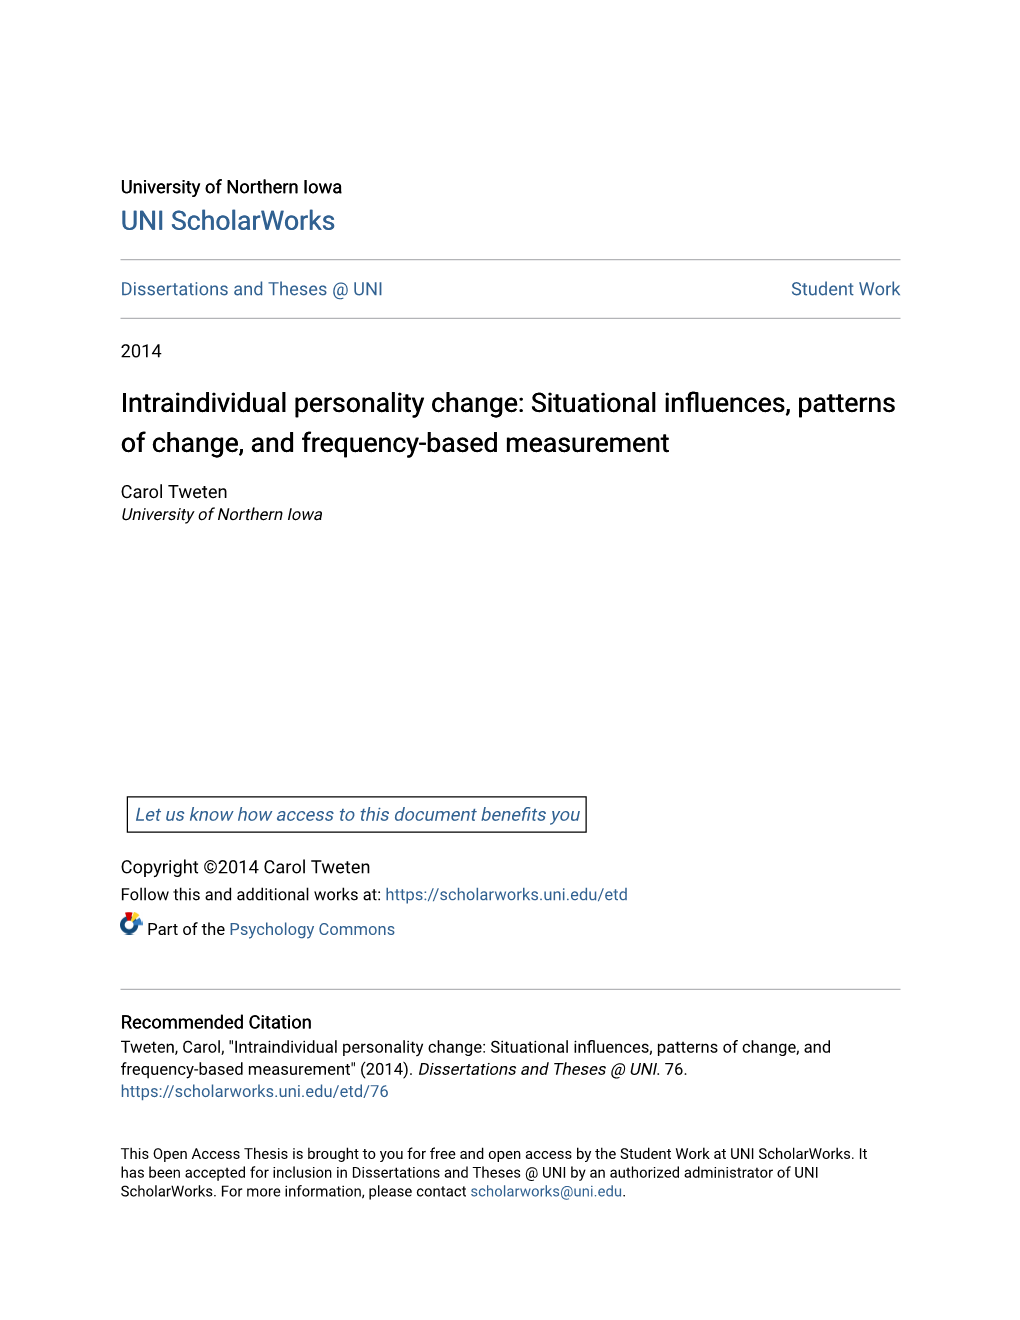 Intraindividual Personality Change: Situational Influences, Patterns of Change, and Frequency-Based Measurement